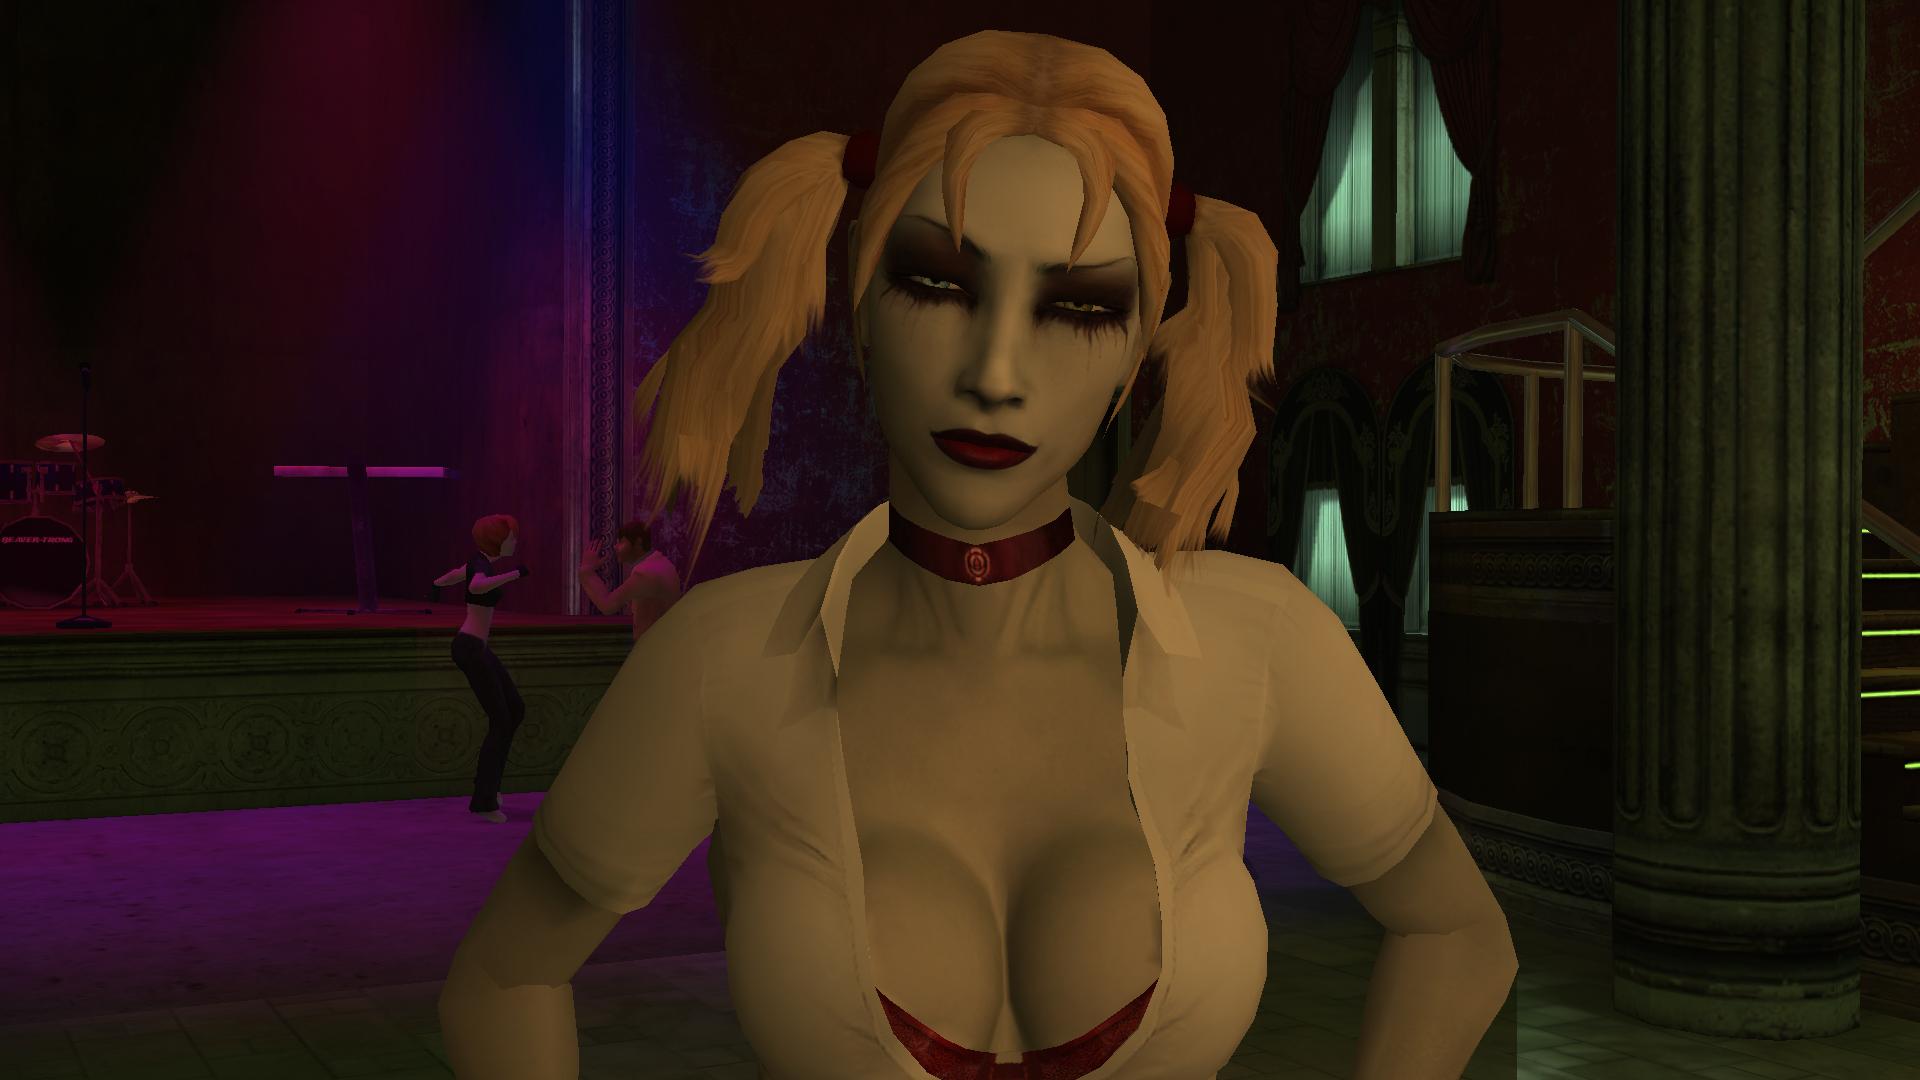  A new mod aims to remaster 5500 voice lines from cult classic RPG, Vampire: The Masquerade - Bloodlines, cleaning up the audio and fixing volume levels 'with extreme care for the source material' 